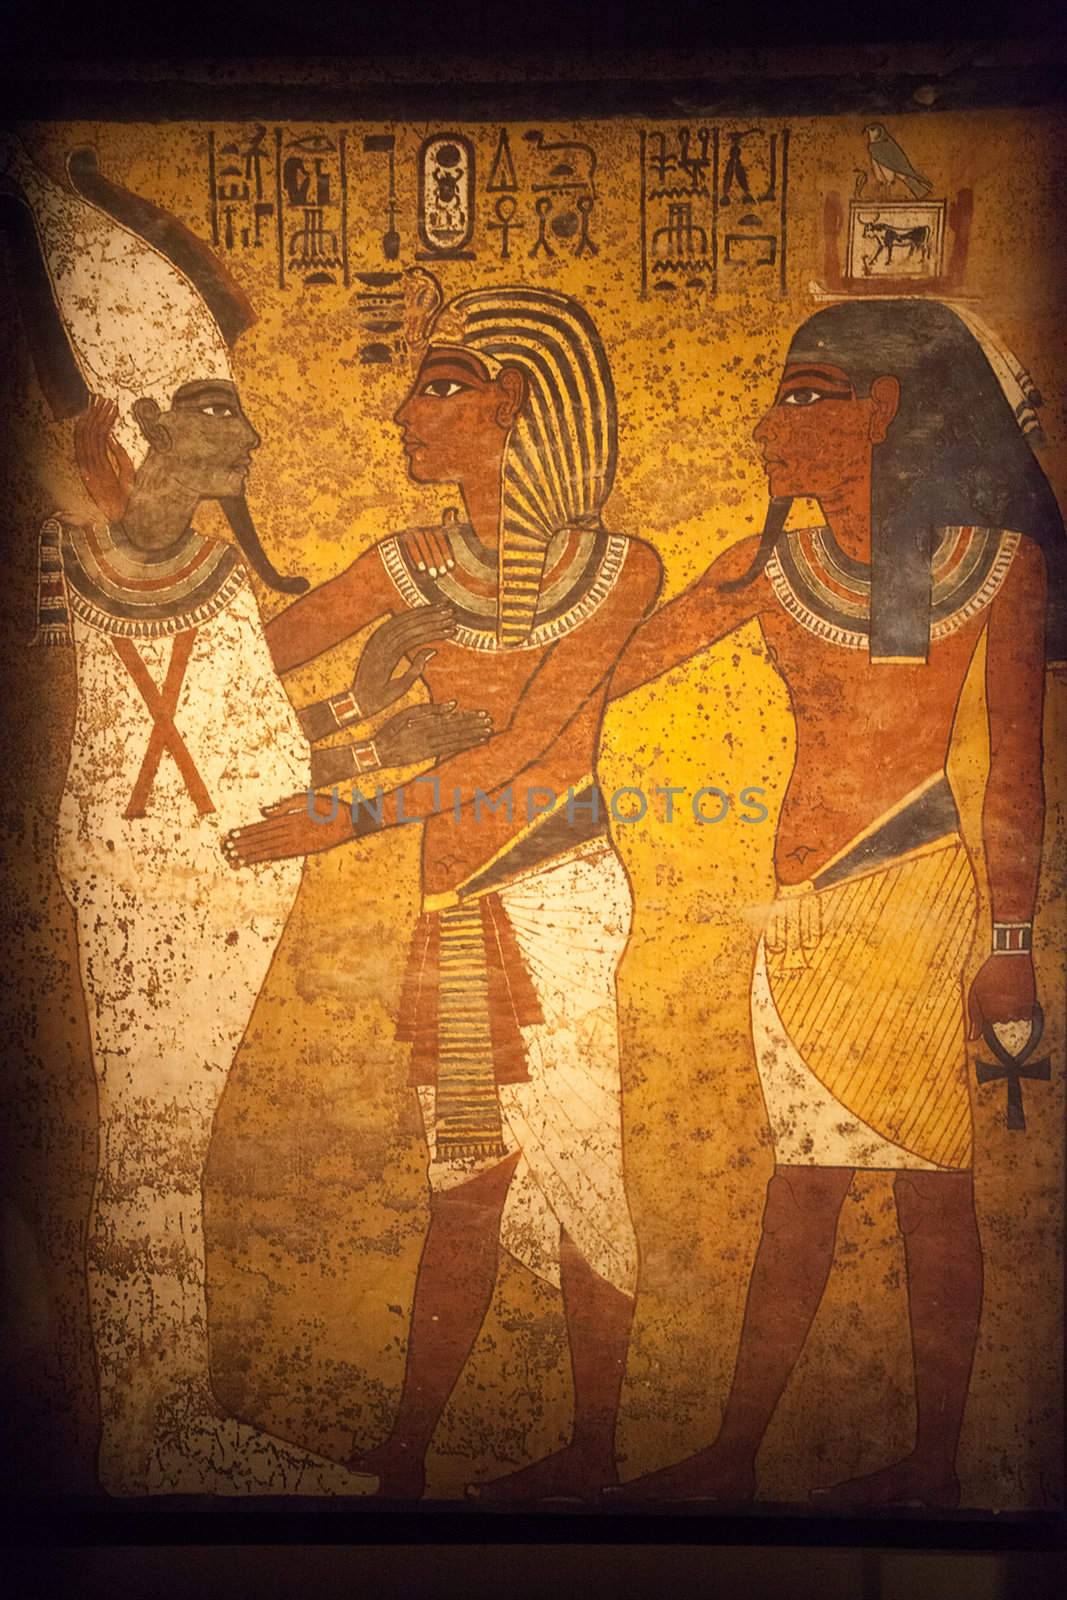 Scene from Egyptian Wall Mural - Original Piece